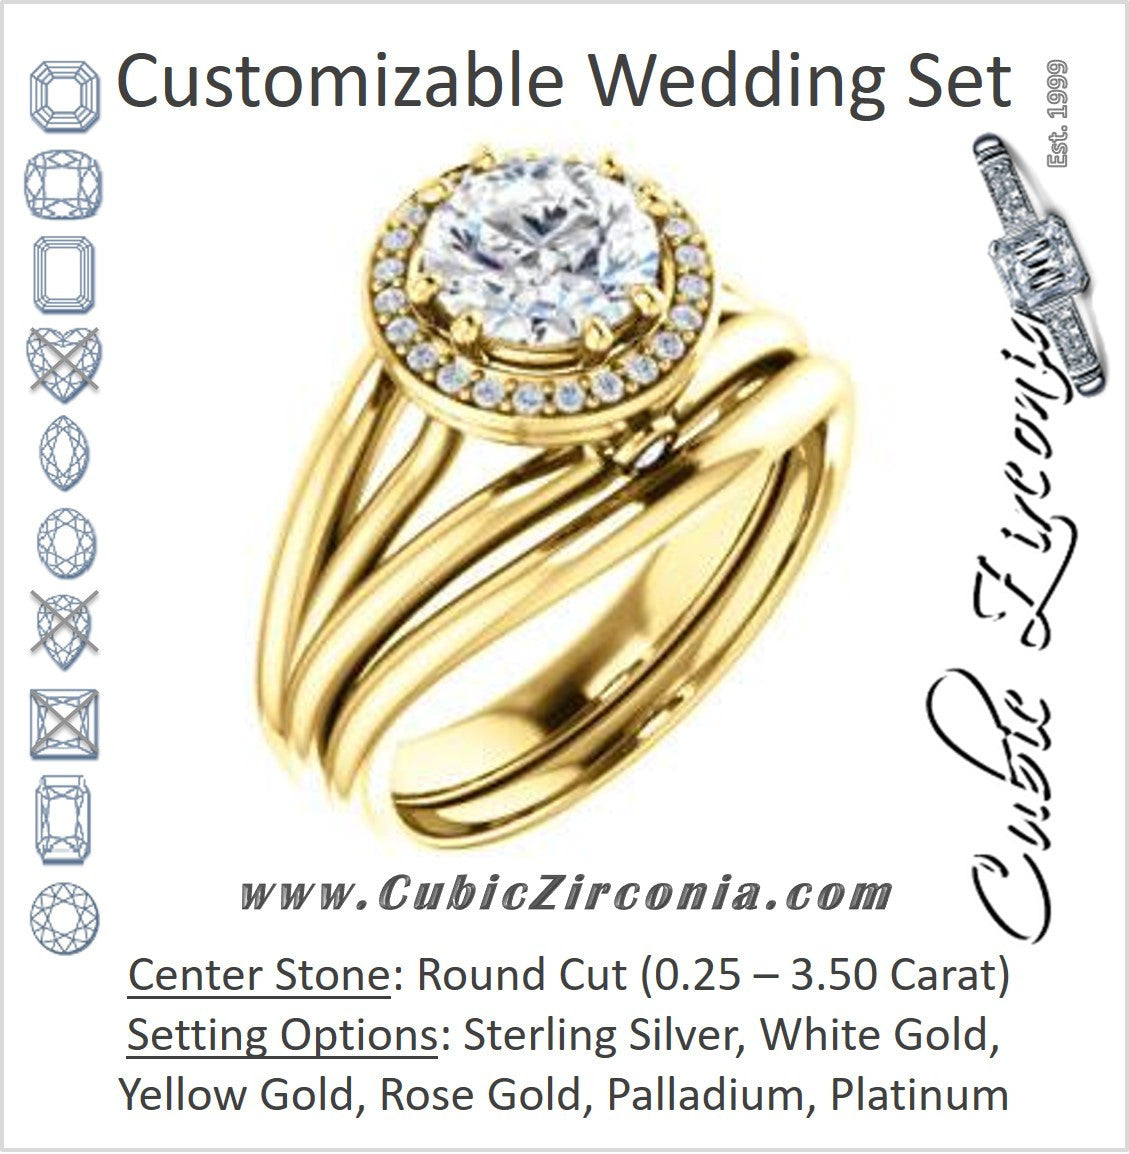 CZ Wedding Set, featuring The Wanda Lea engagement ring (Customizable Round Cut Halo-style with Ultrawide Tri-split Band & Peekaboo Accents)